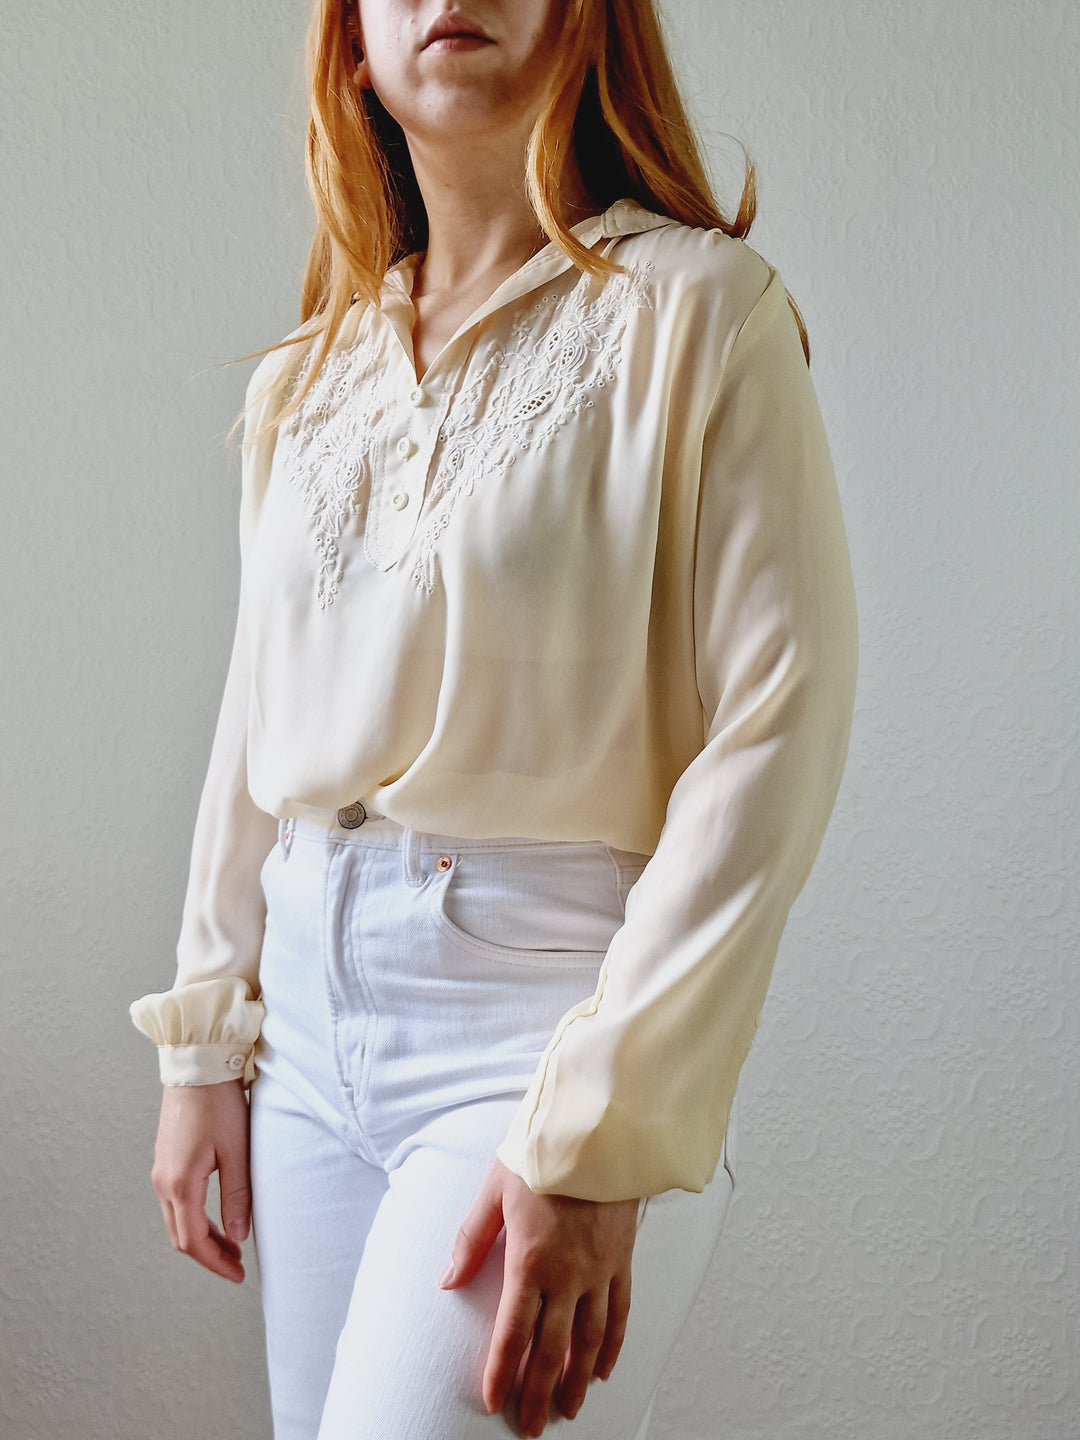 Vintage 80s Pale Yellow Long Sleeve Collared Blouse with Embroidery Detail - S/M